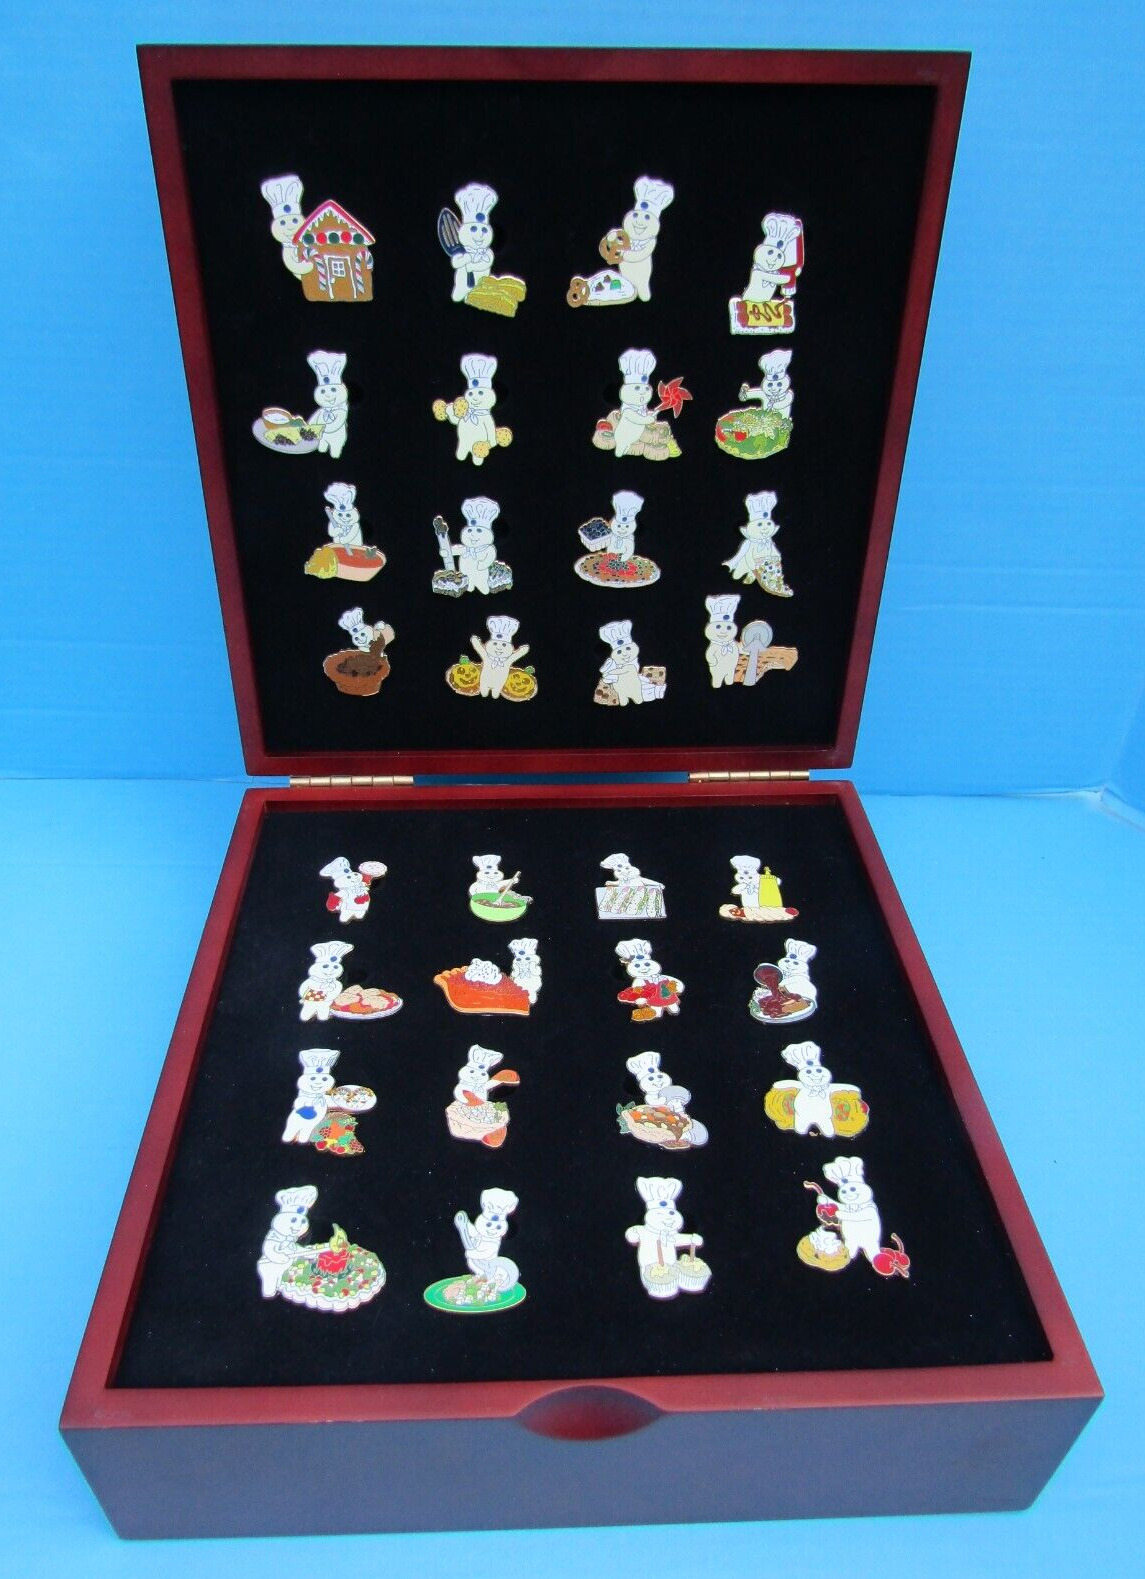 FS Pillsbury Doughboy 32 PC PIN COLLECTION w RECIPE CARDS IN WOOD BOX - Willabee